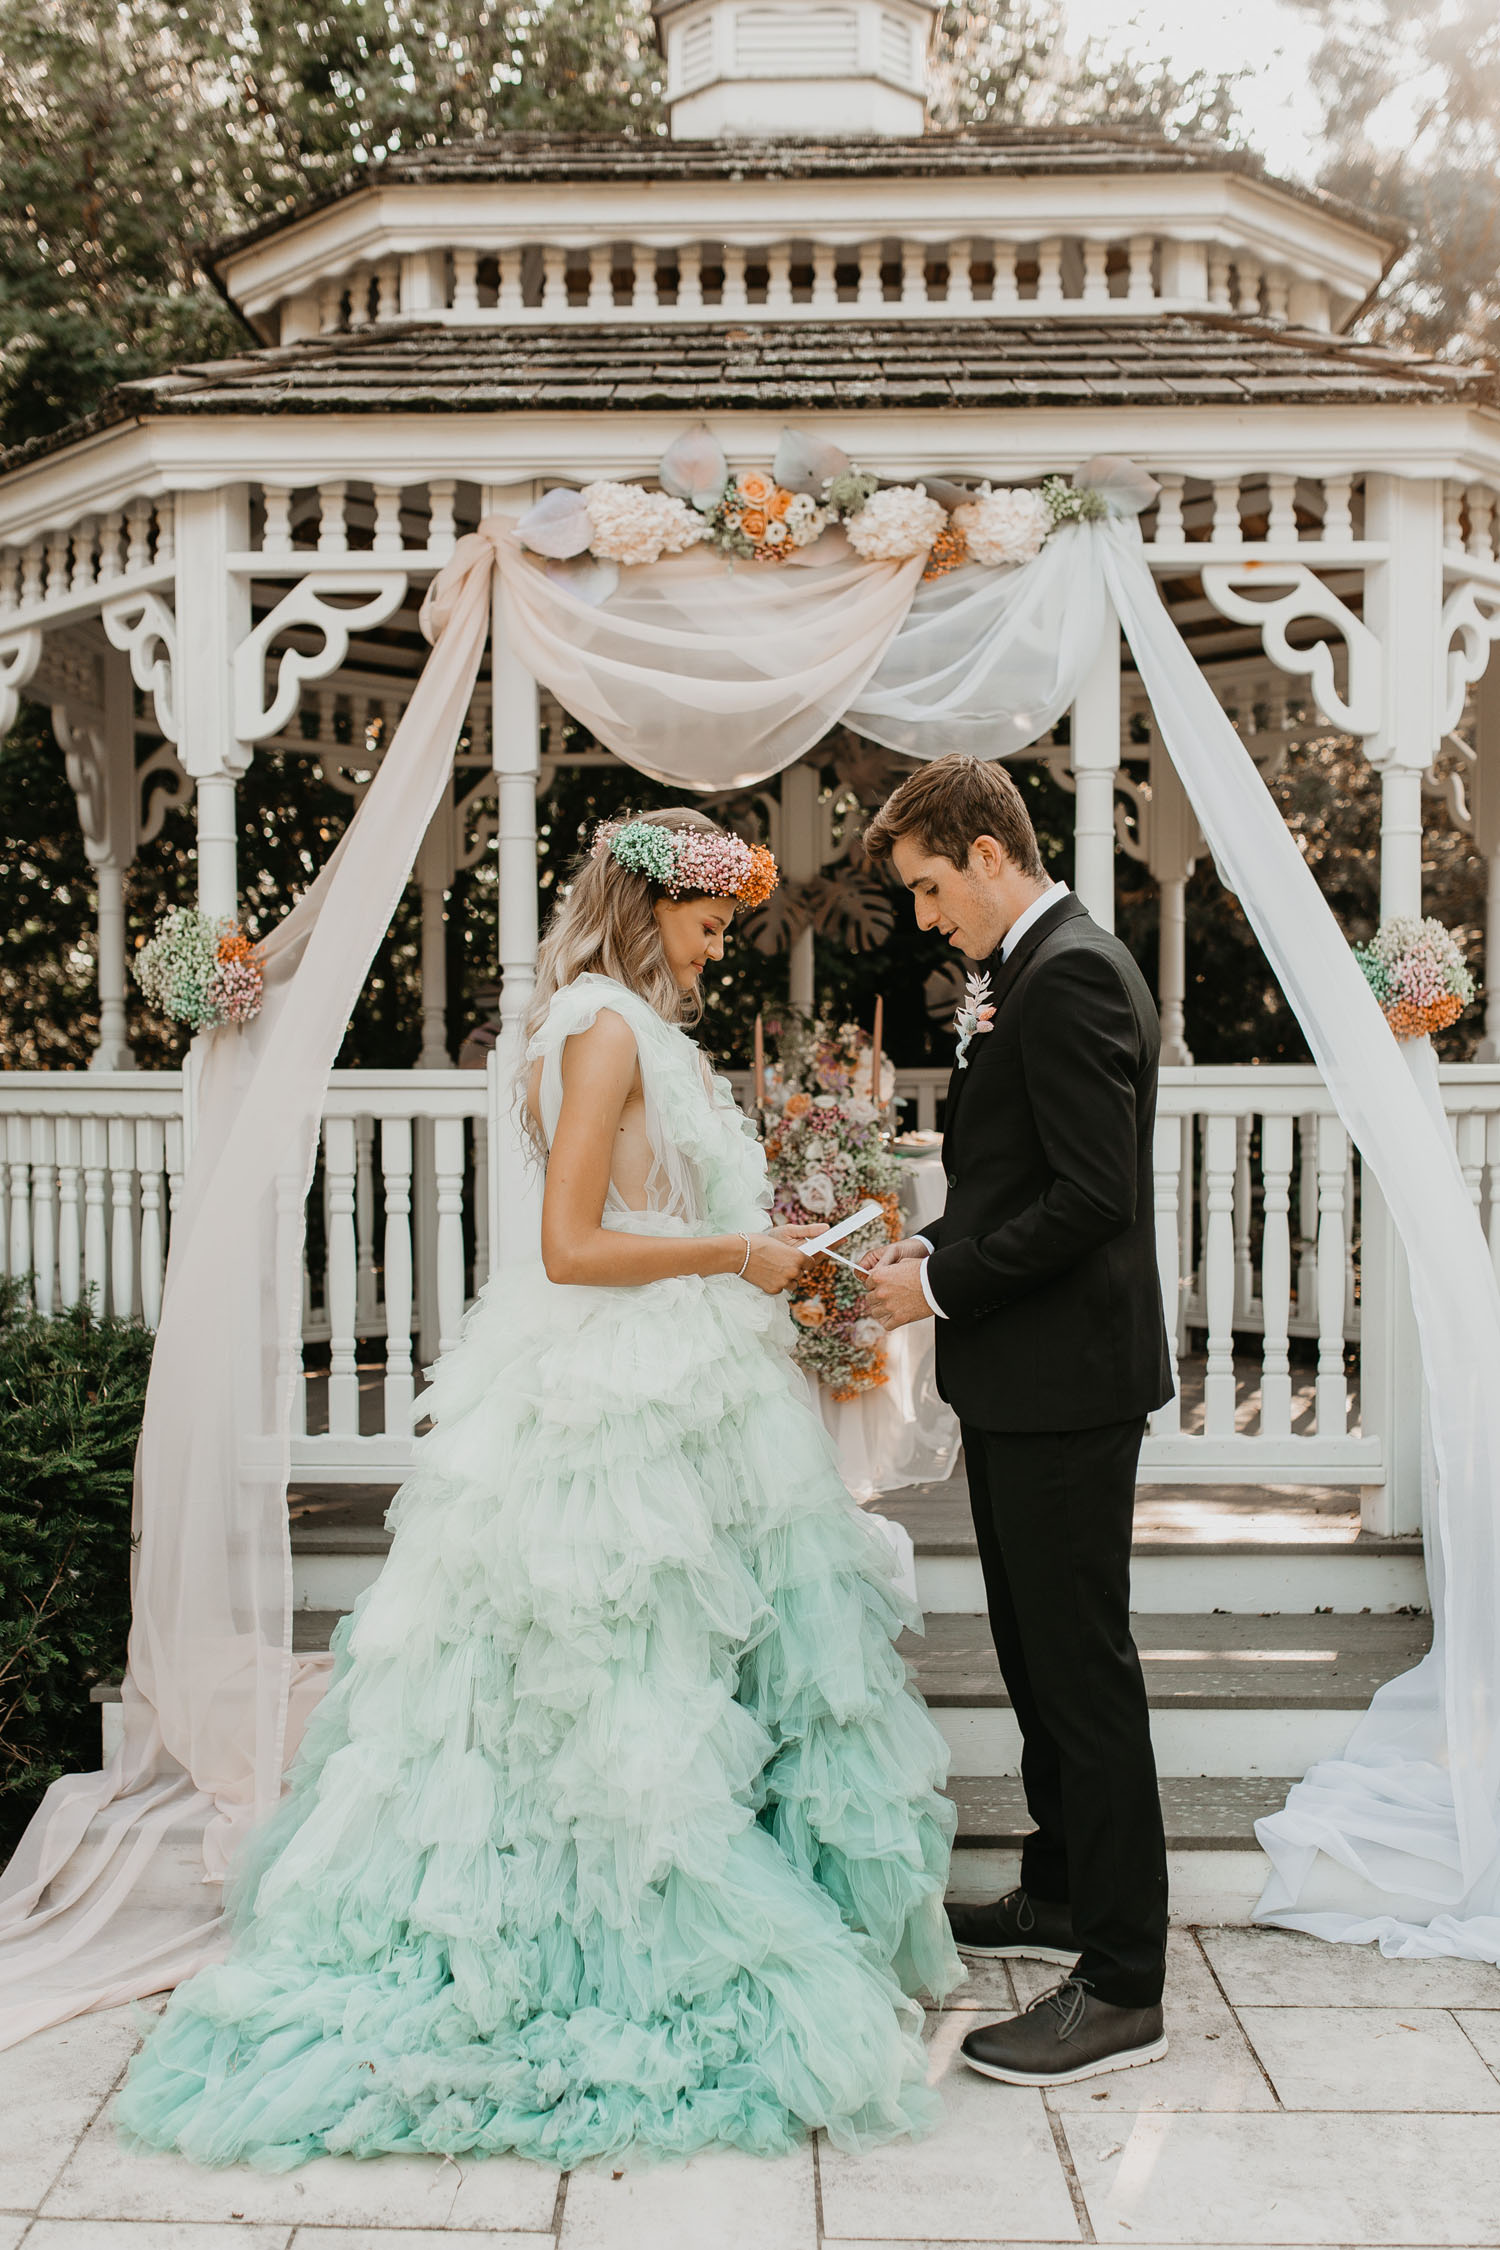 Baby, Just Say Yes Whimsical Taylor Swift Wedding Inspiration